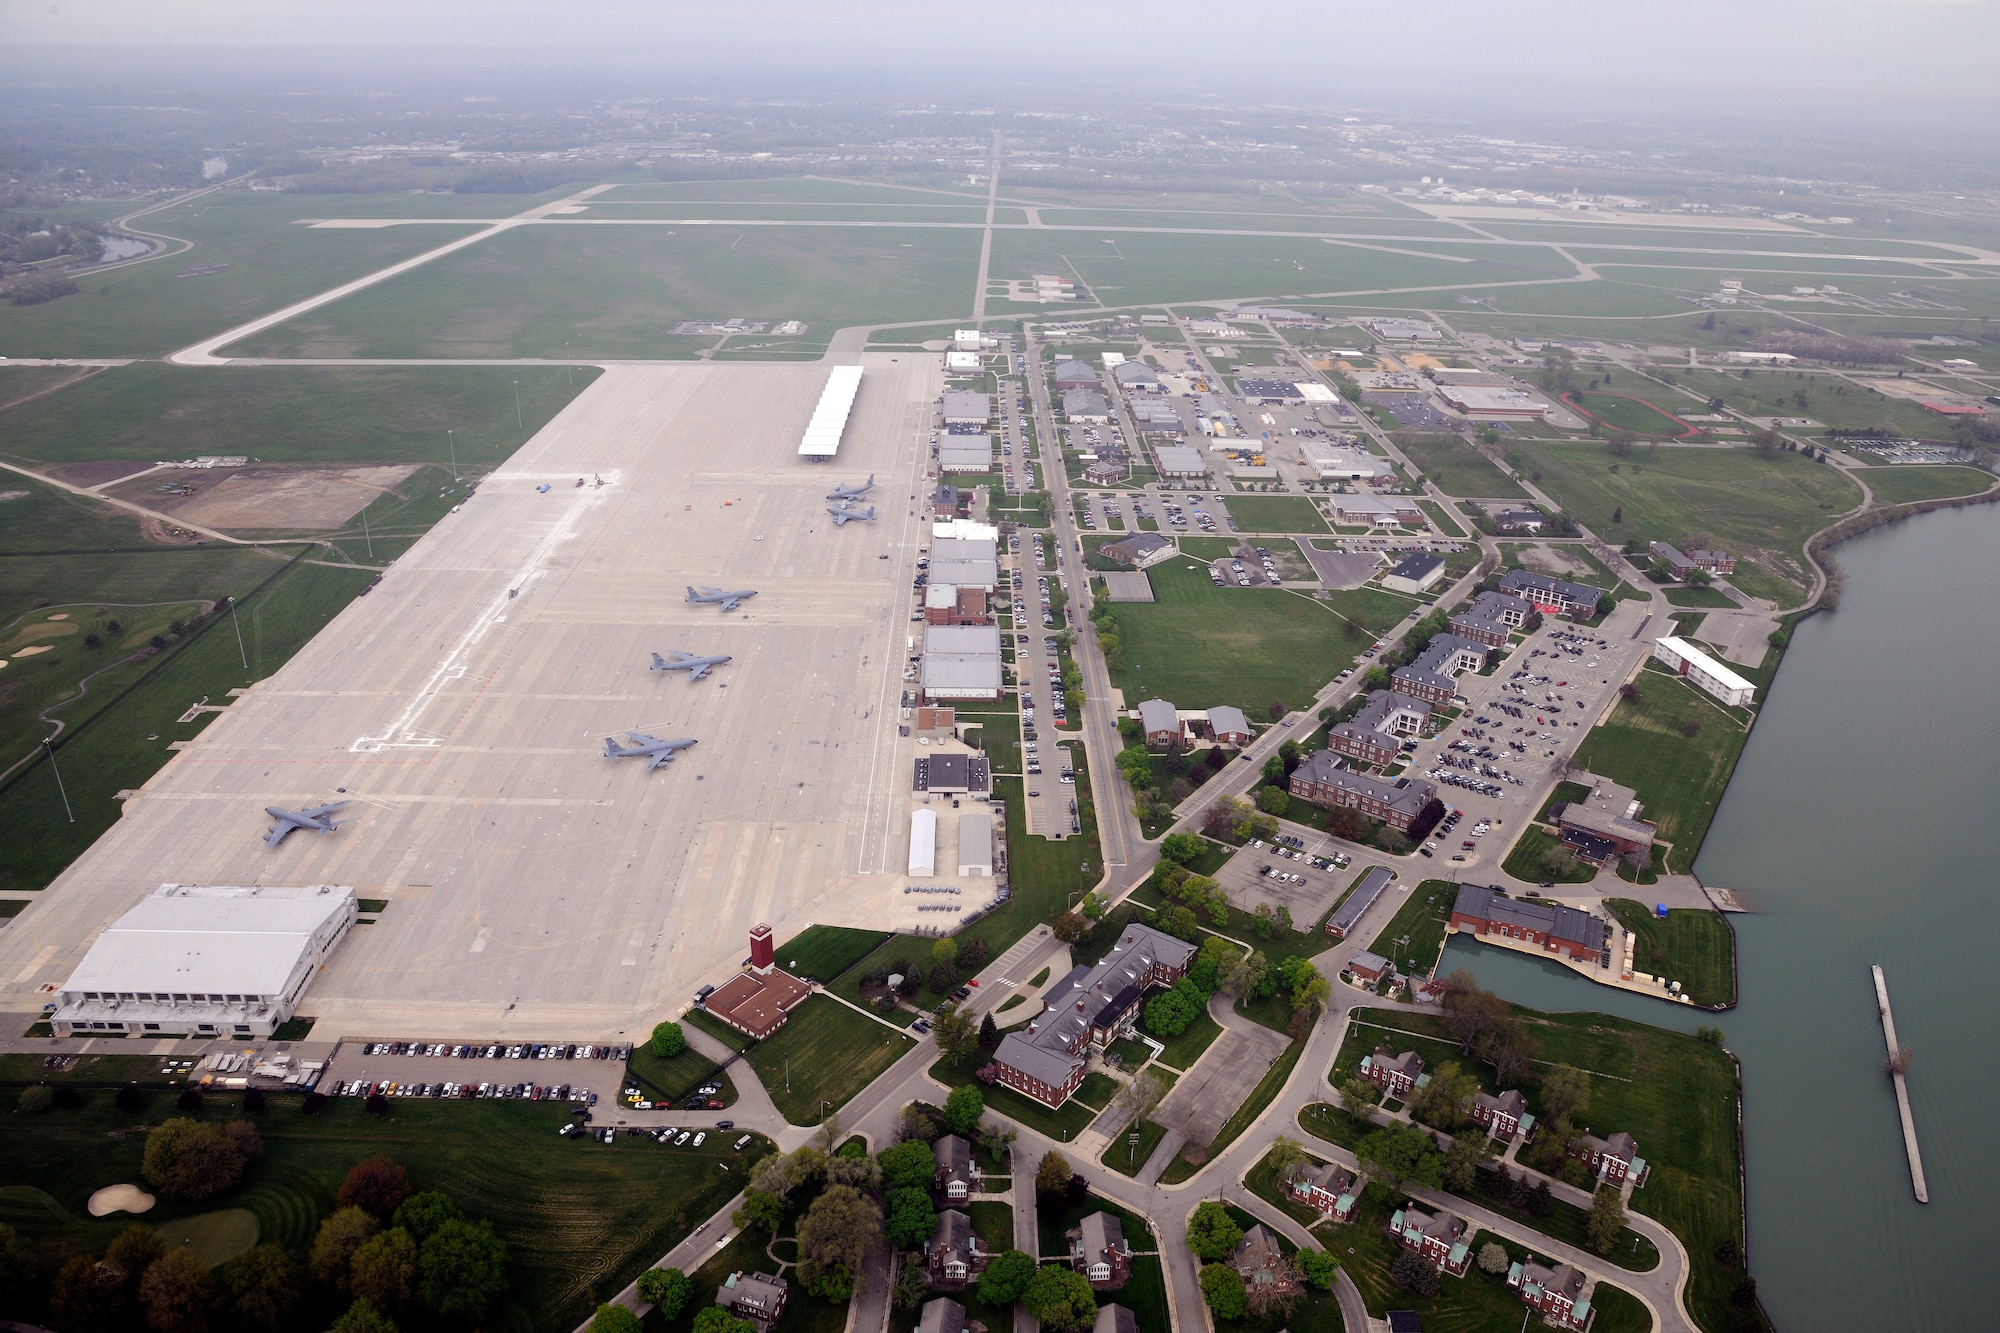 Selfridge Air National Guard Base is seen from the south in this May 12, 2016, photo, taken from an HH-65 Dolphin helicopter operated by U.S. Coast Guard Air Station Detroit, one of some 40 tenants that have operations at Selfridge. Personnel assigned to the base near Detroit are ramping up for the 100th anniversary of the establishment of Selfridge Field in July 1917. Selfridge is one of the oldest continuously operating military air fields in the nation. The 127th Wing is a component of the Michigan Air National Guard and has been the host unit at Selfridge since 1971. (U.S. Air National Guard photo by Senior Airman Ryan Zeski)